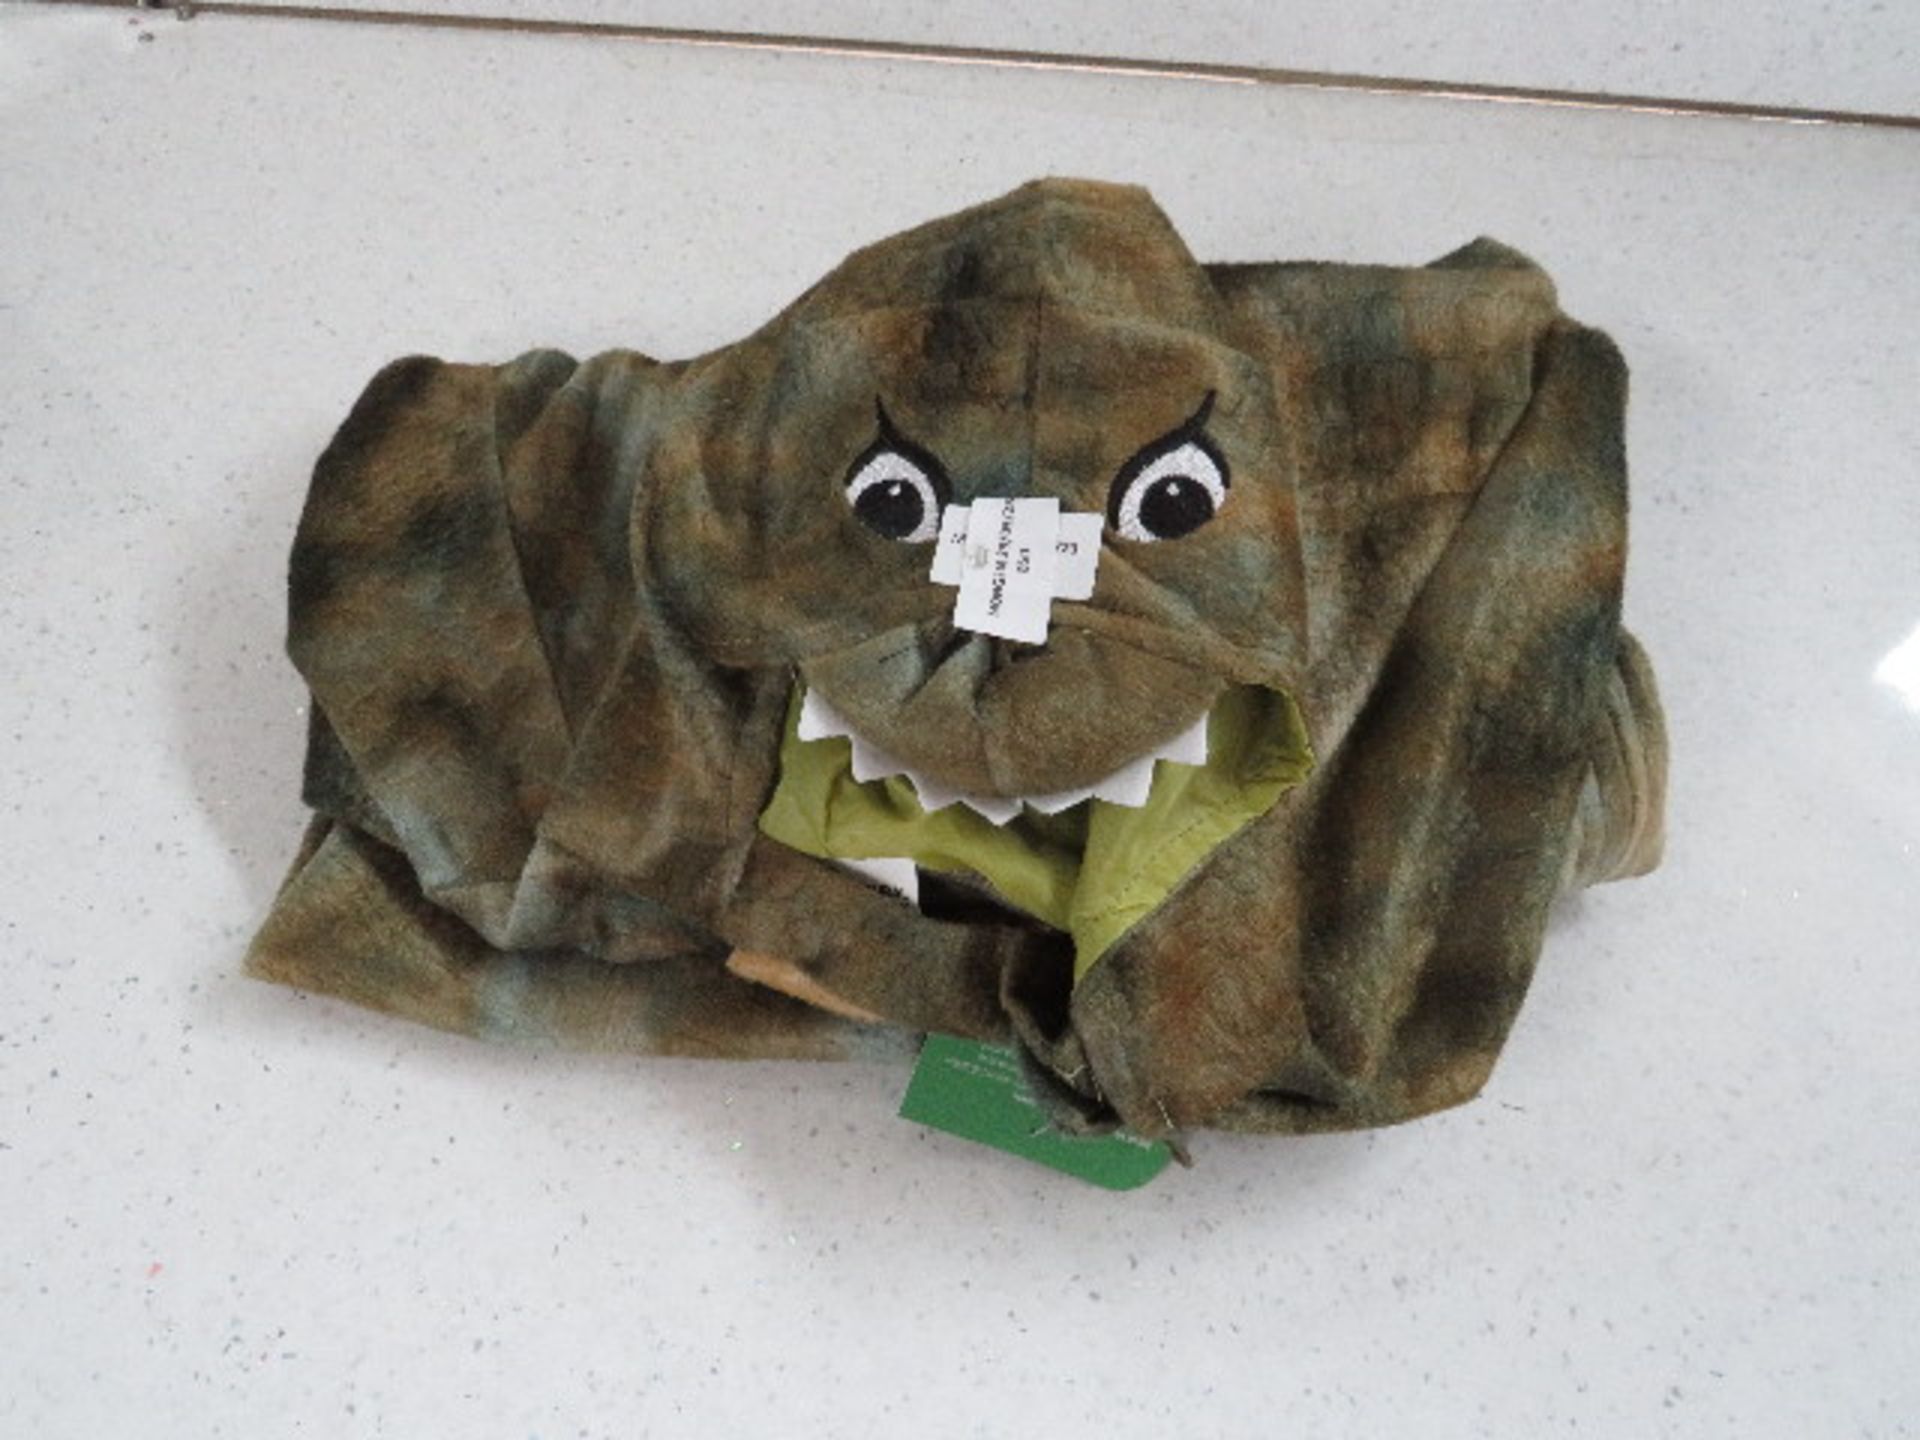 National History Museum - T.Rex Dressup - Size 2-3 Years - Good Condition & Packaged.